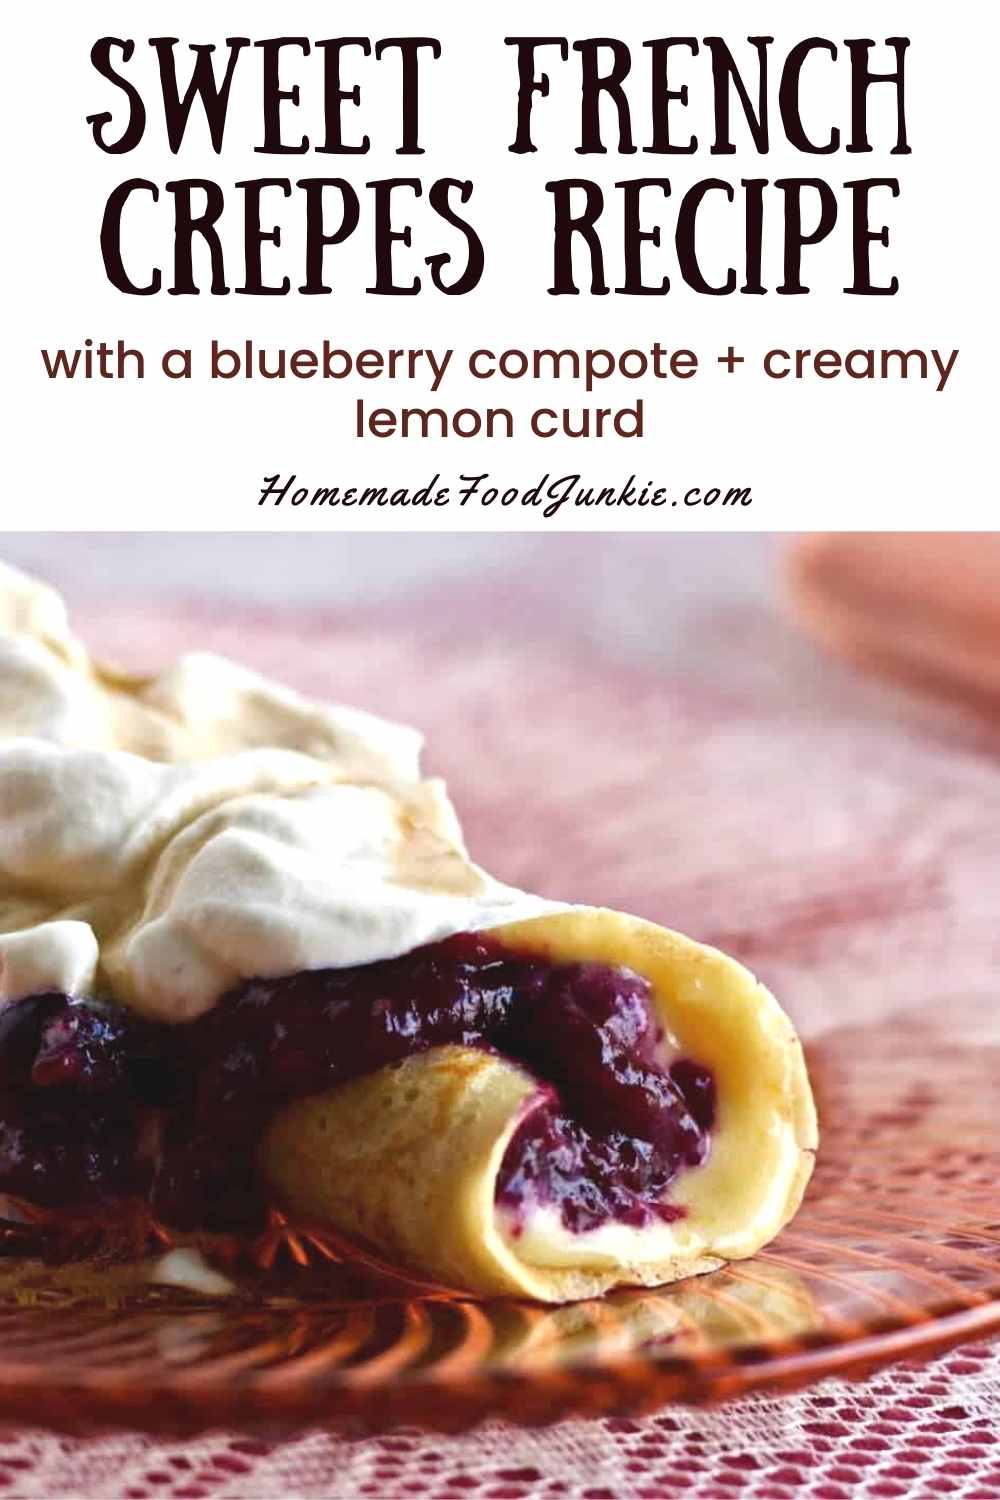 Sweet French Crepes With Blueberry Compote And A Creamy Lemon Curd-Pin Image